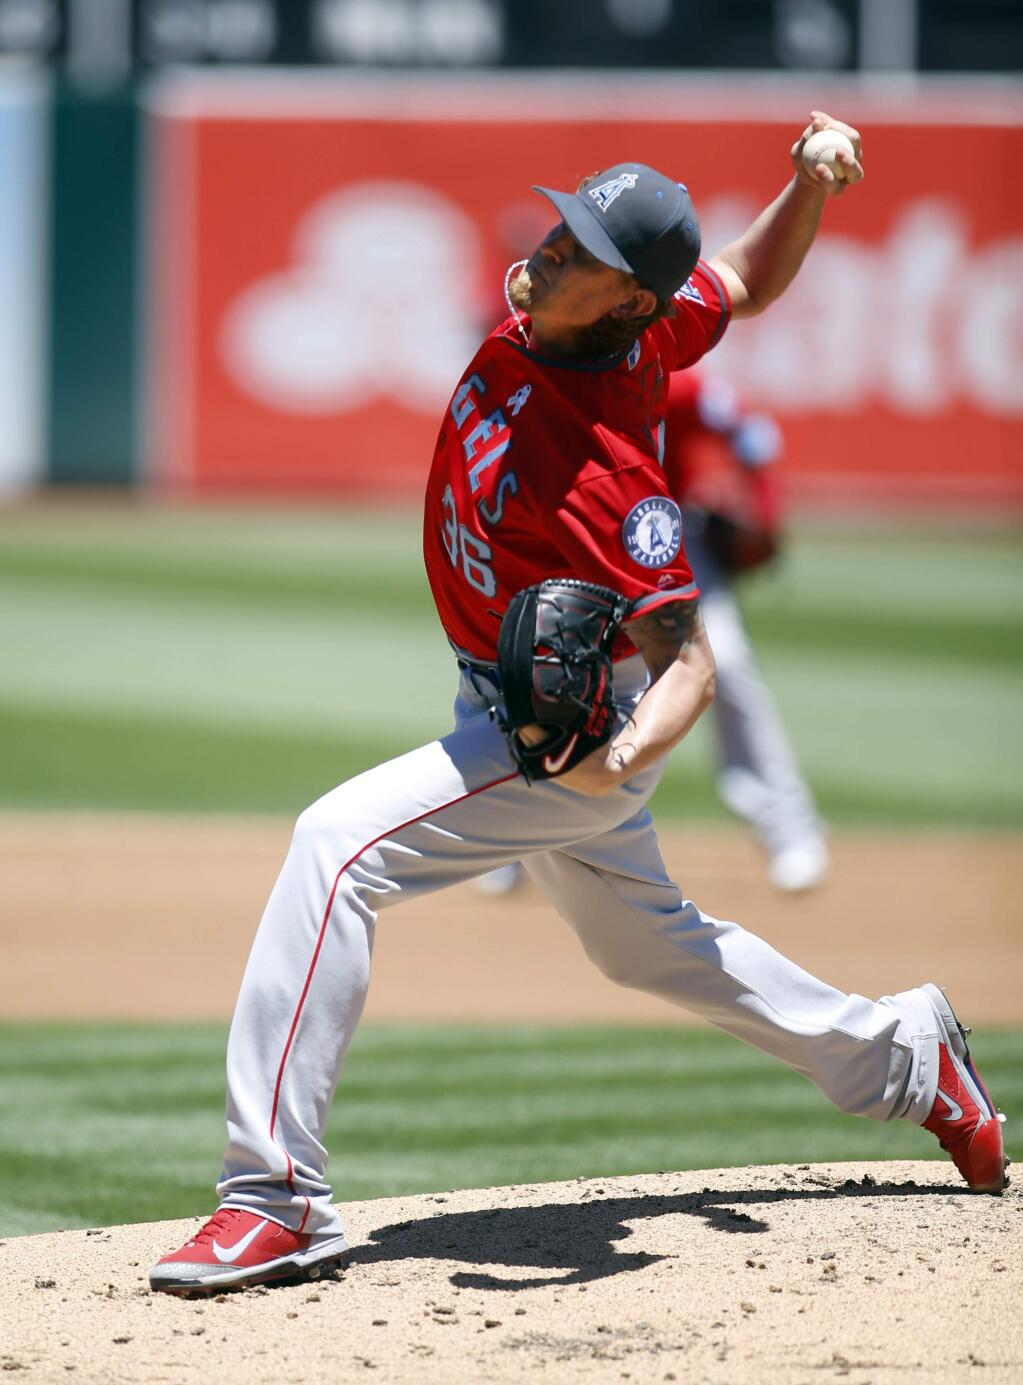 Los Angeles Angels starting pitcher Jered Weaver delivers against the Oakland Athletics during the first inning of a baseball game Sunday, June 19, 2016, in Oakland, Calif. (AP Photo/D. Ross Cameron)